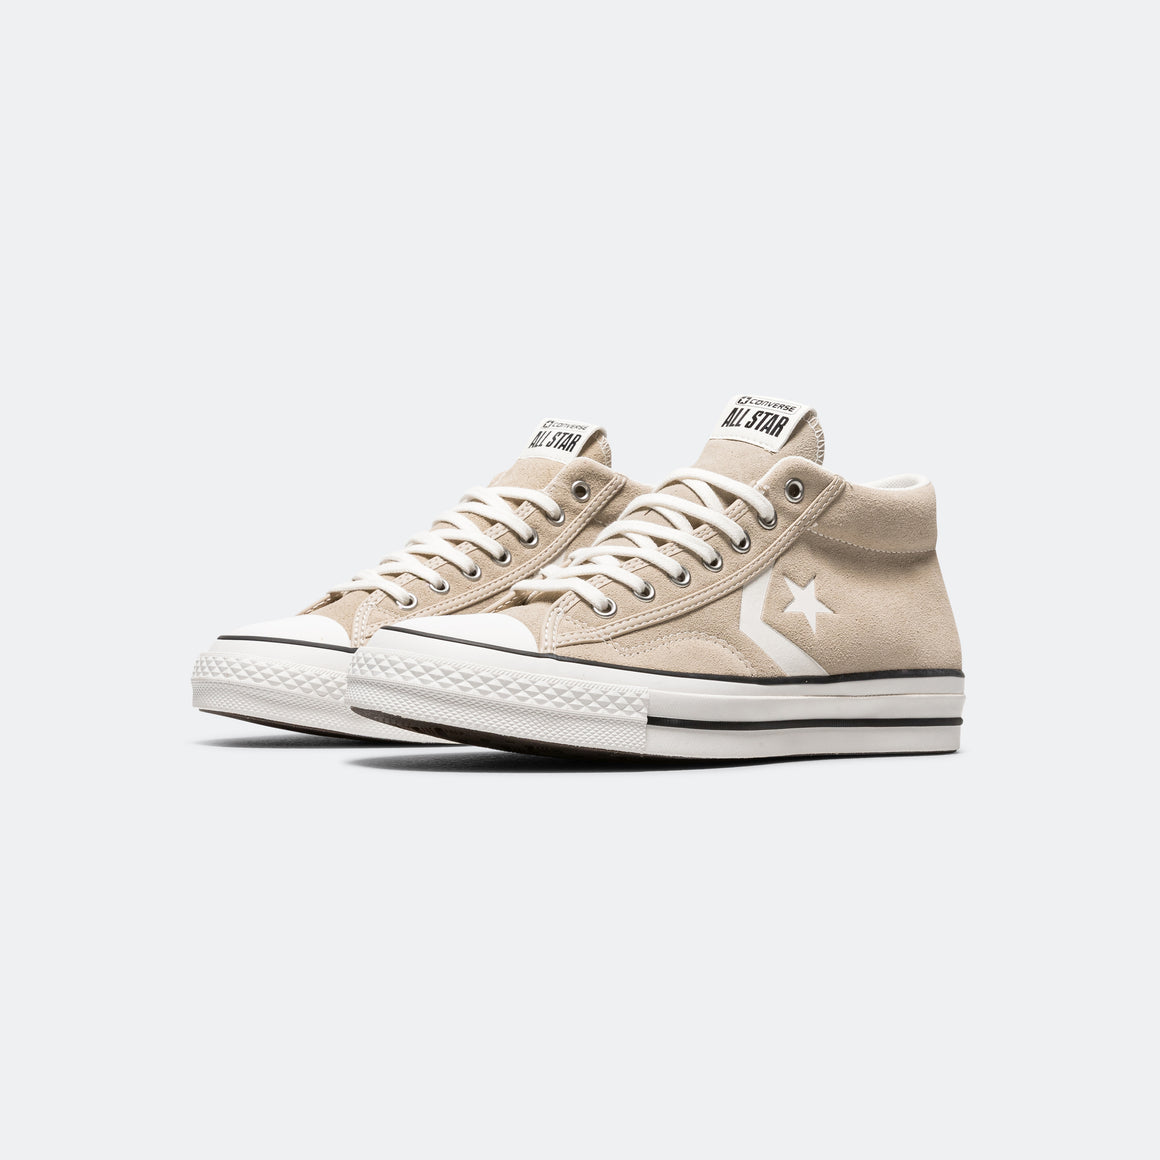 Converse - Star Player 76 Mid - Beach Stone/Vintage White-Black - UP THERE